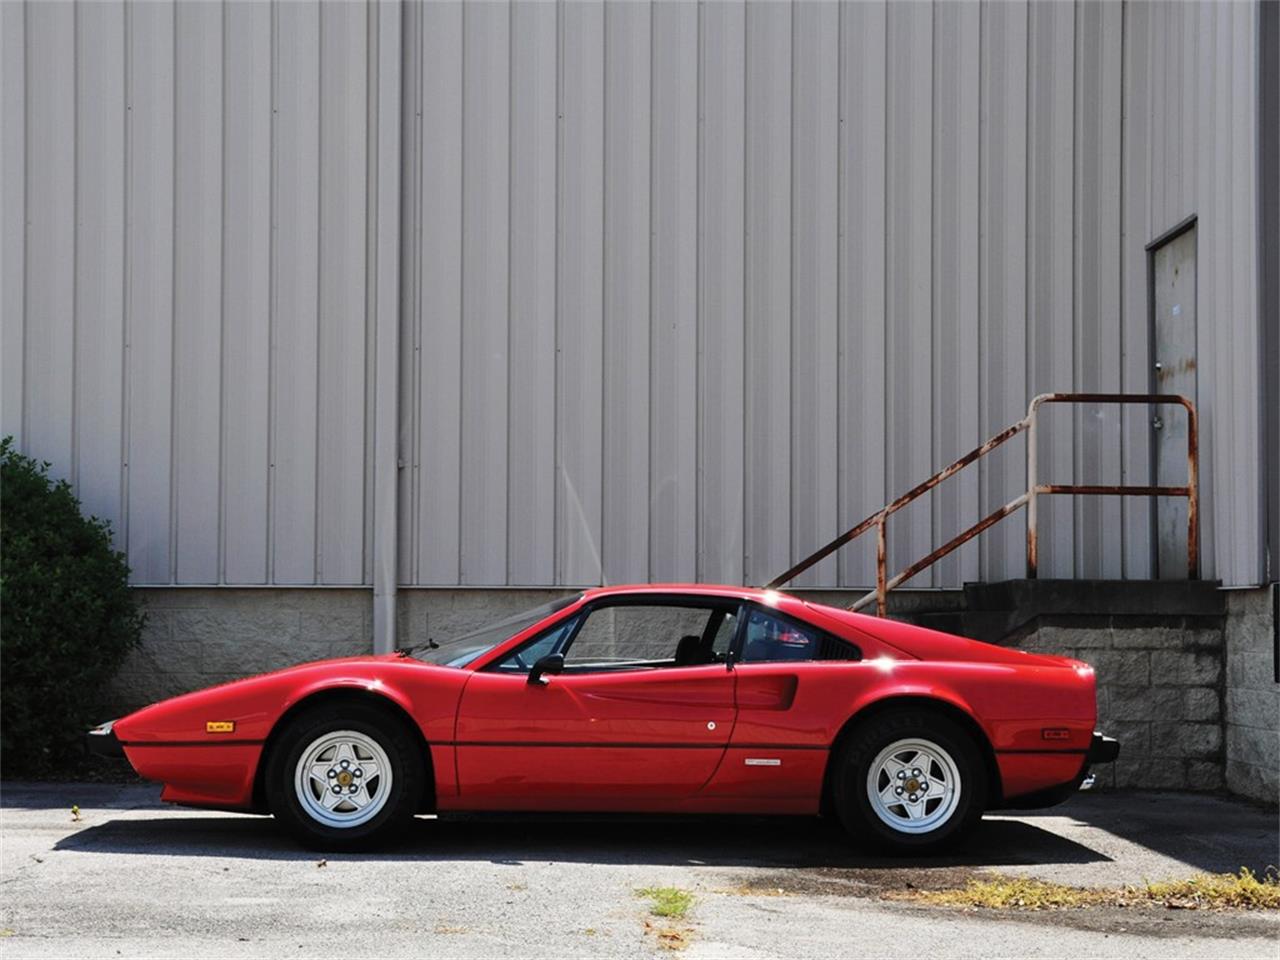 For Sale at Auction: 1980 Ferrari 308 GTBI for sale in Fort Lauderdale, FL